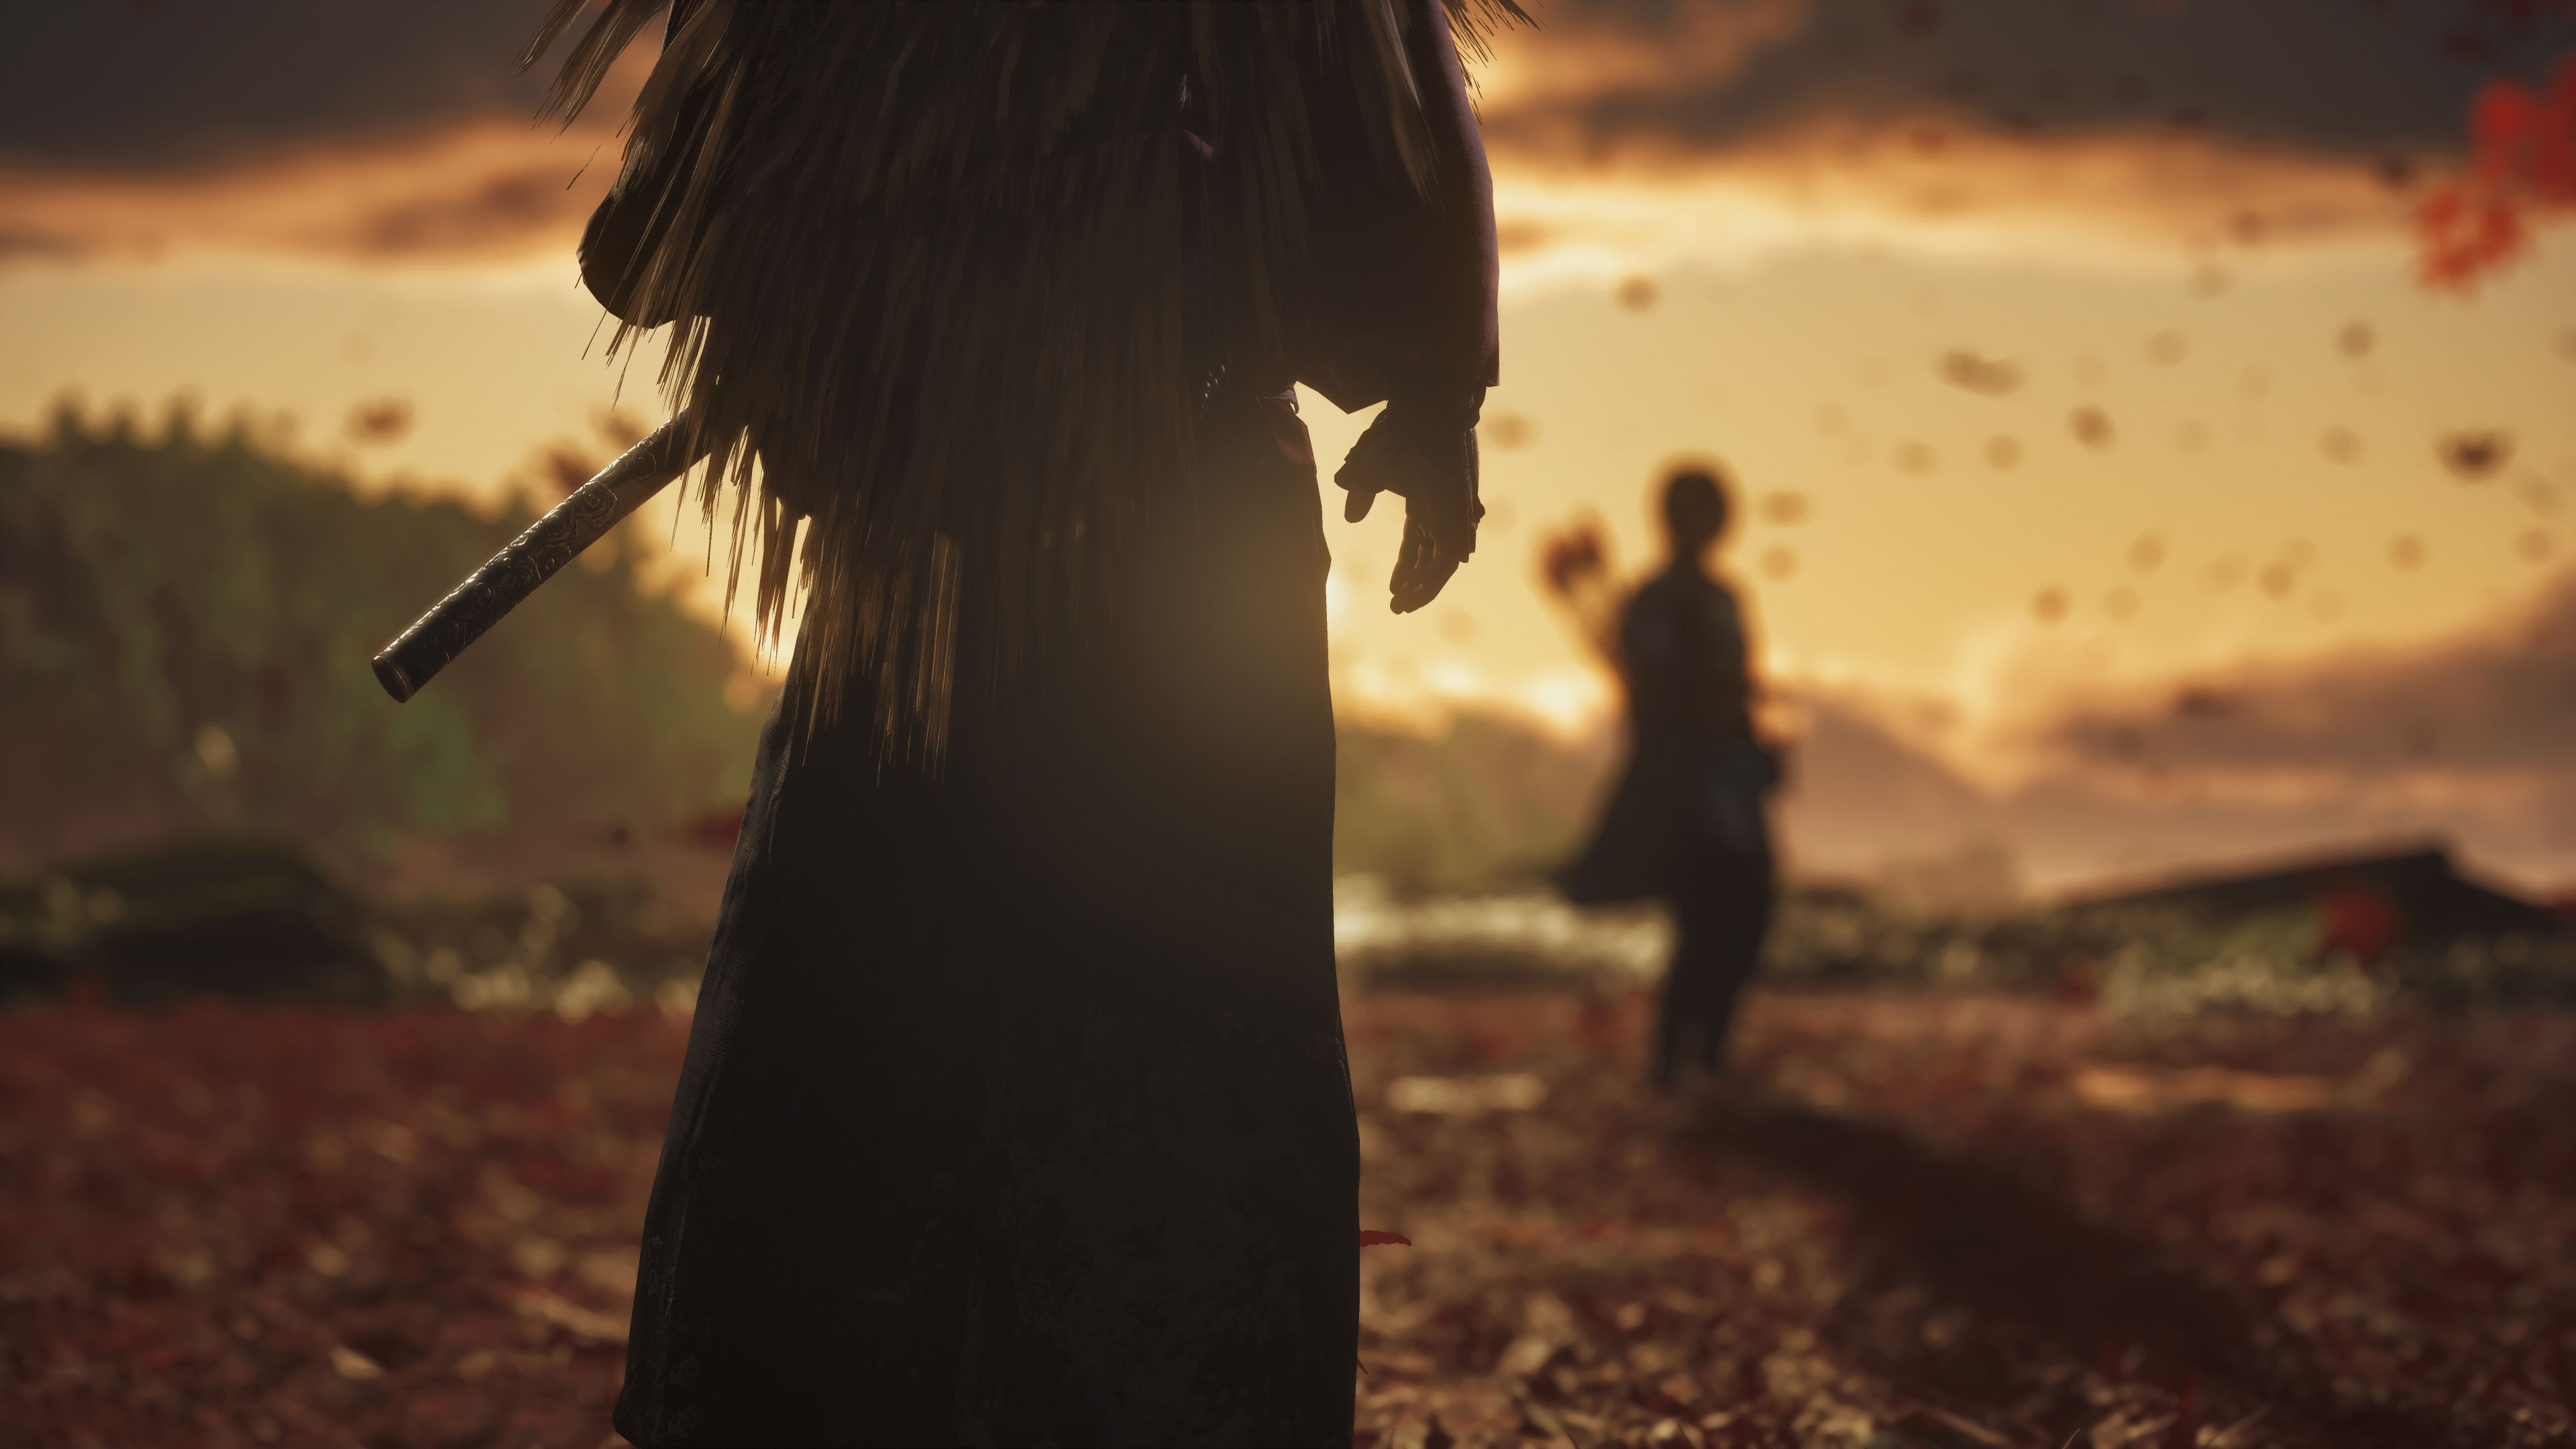 Ghost Of Tsushima 4k hd-wallpapers, ghost of tsushima wallpapers, games